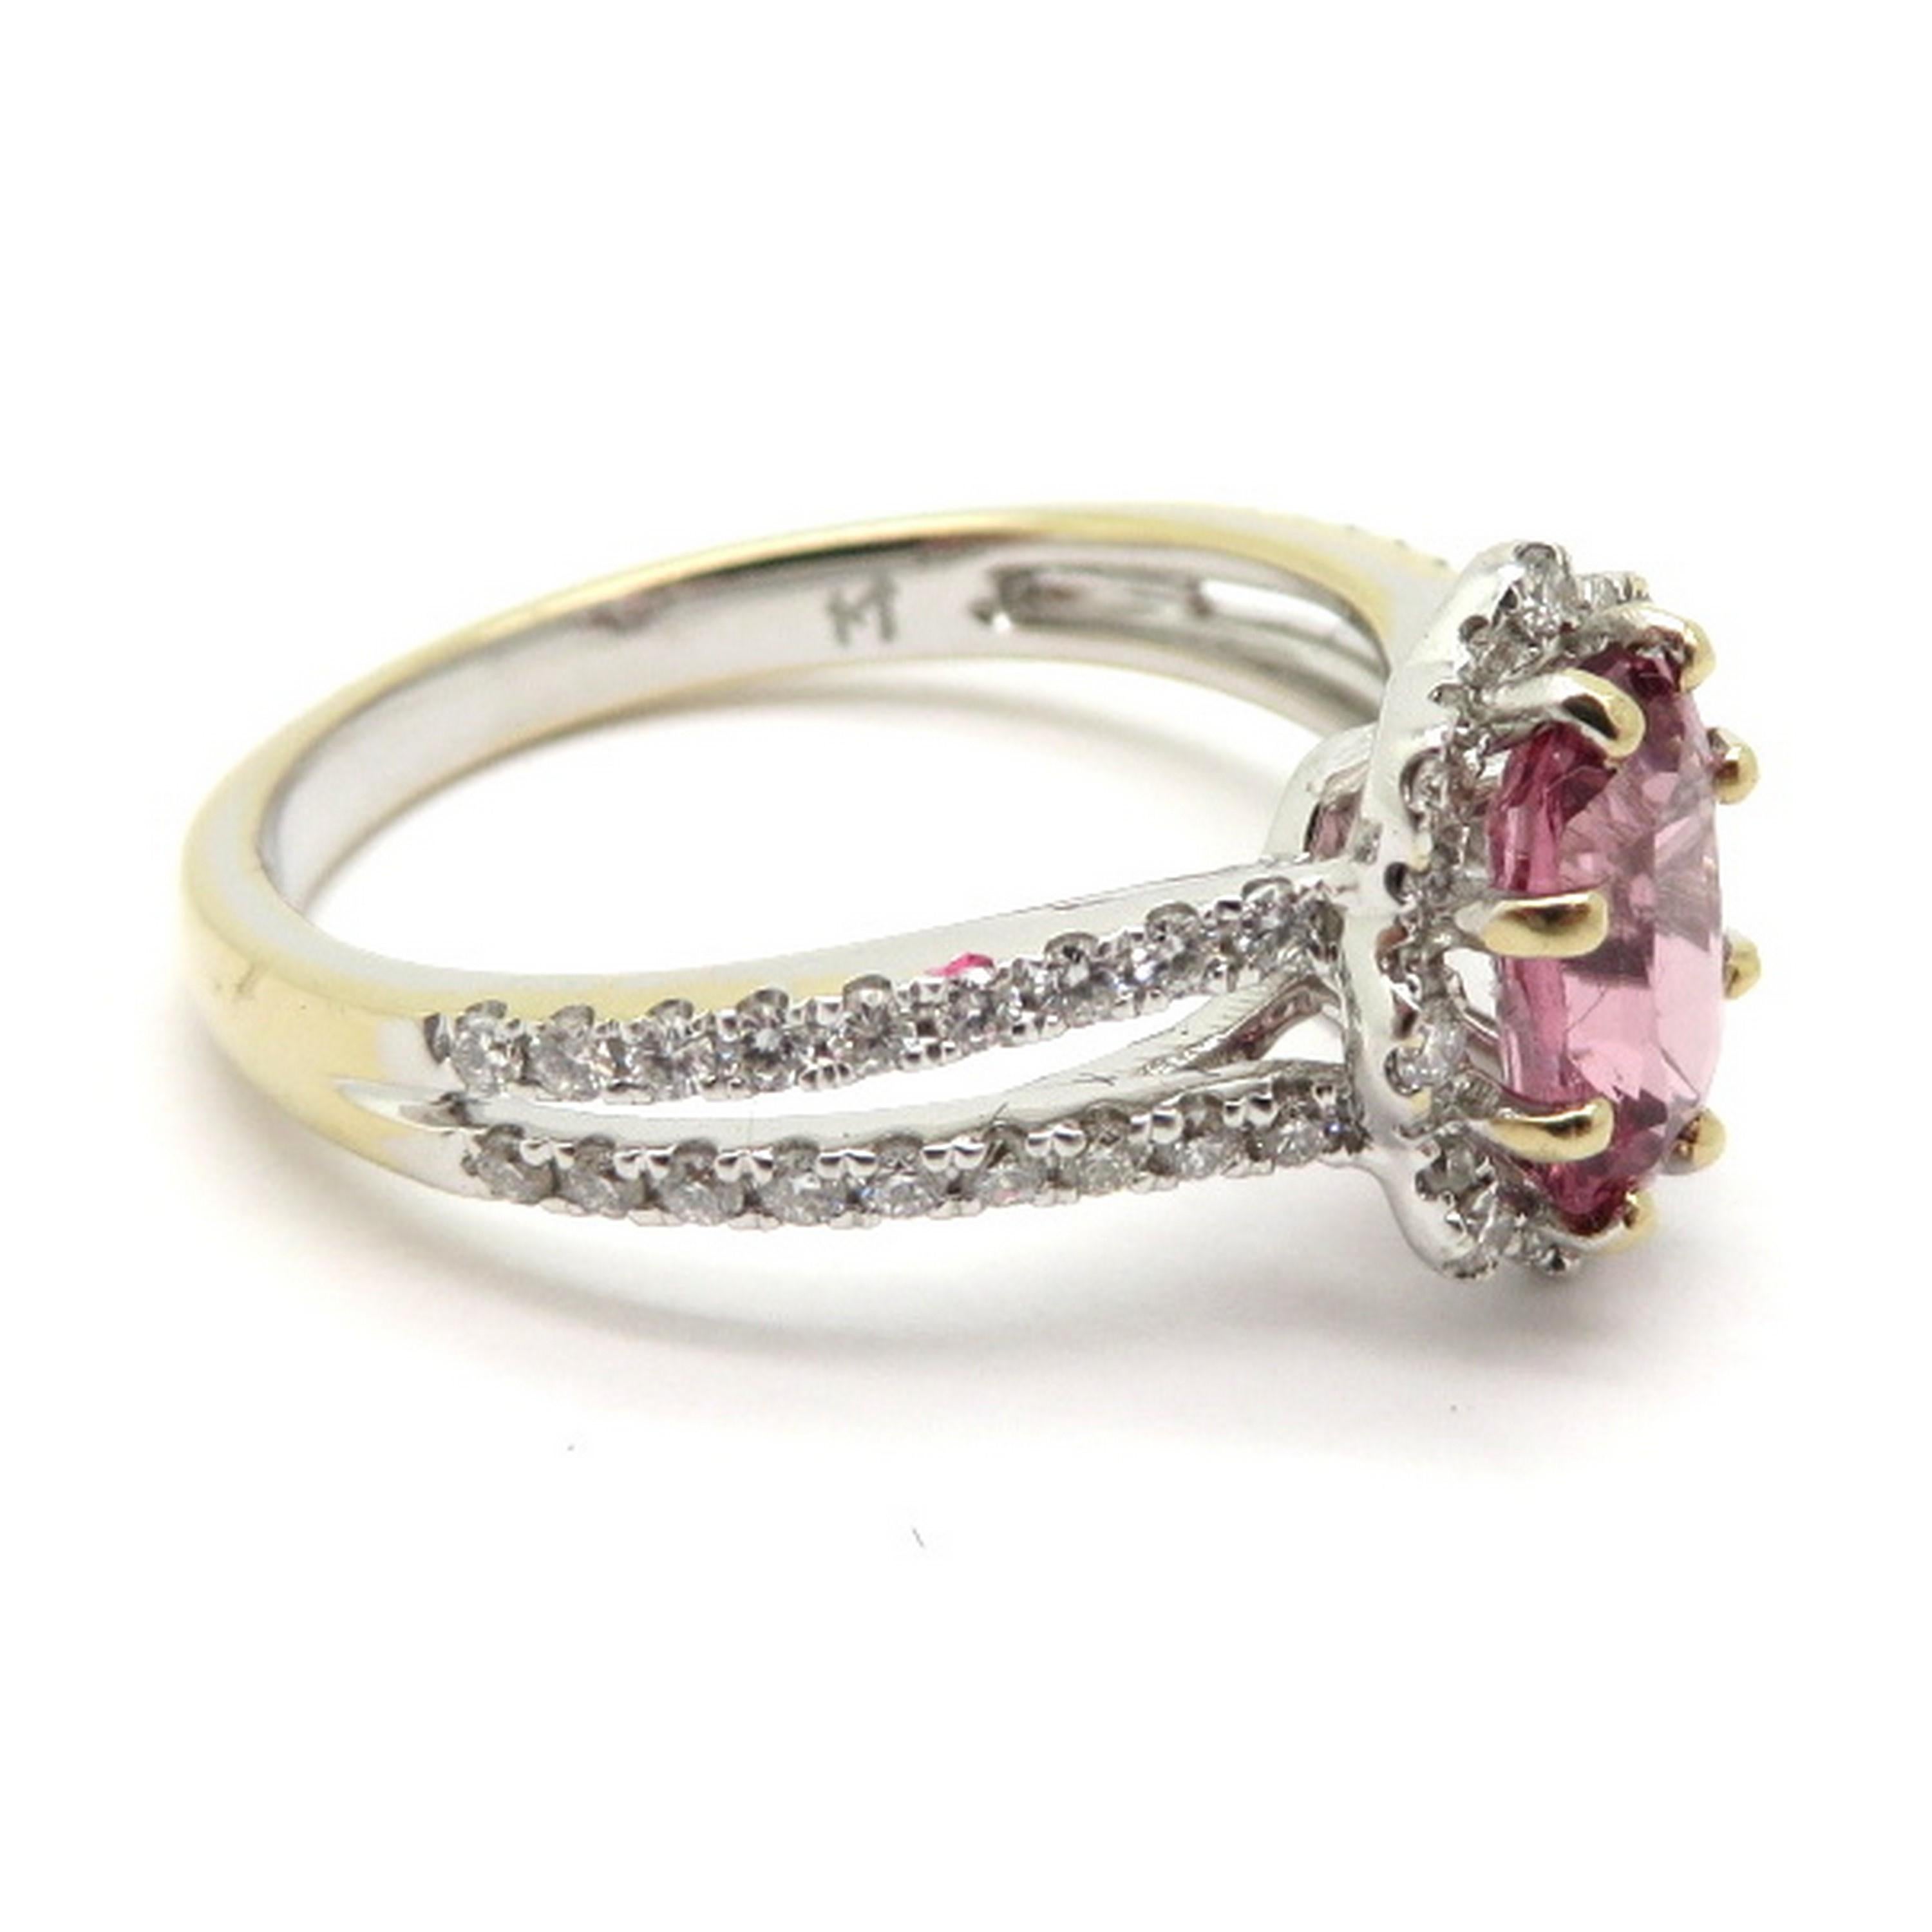 Estate 18 Karat White Gold Pink Spinel and Diamond Fashion Ring In Excellent Condition For Sale In Scottsdale, AZ